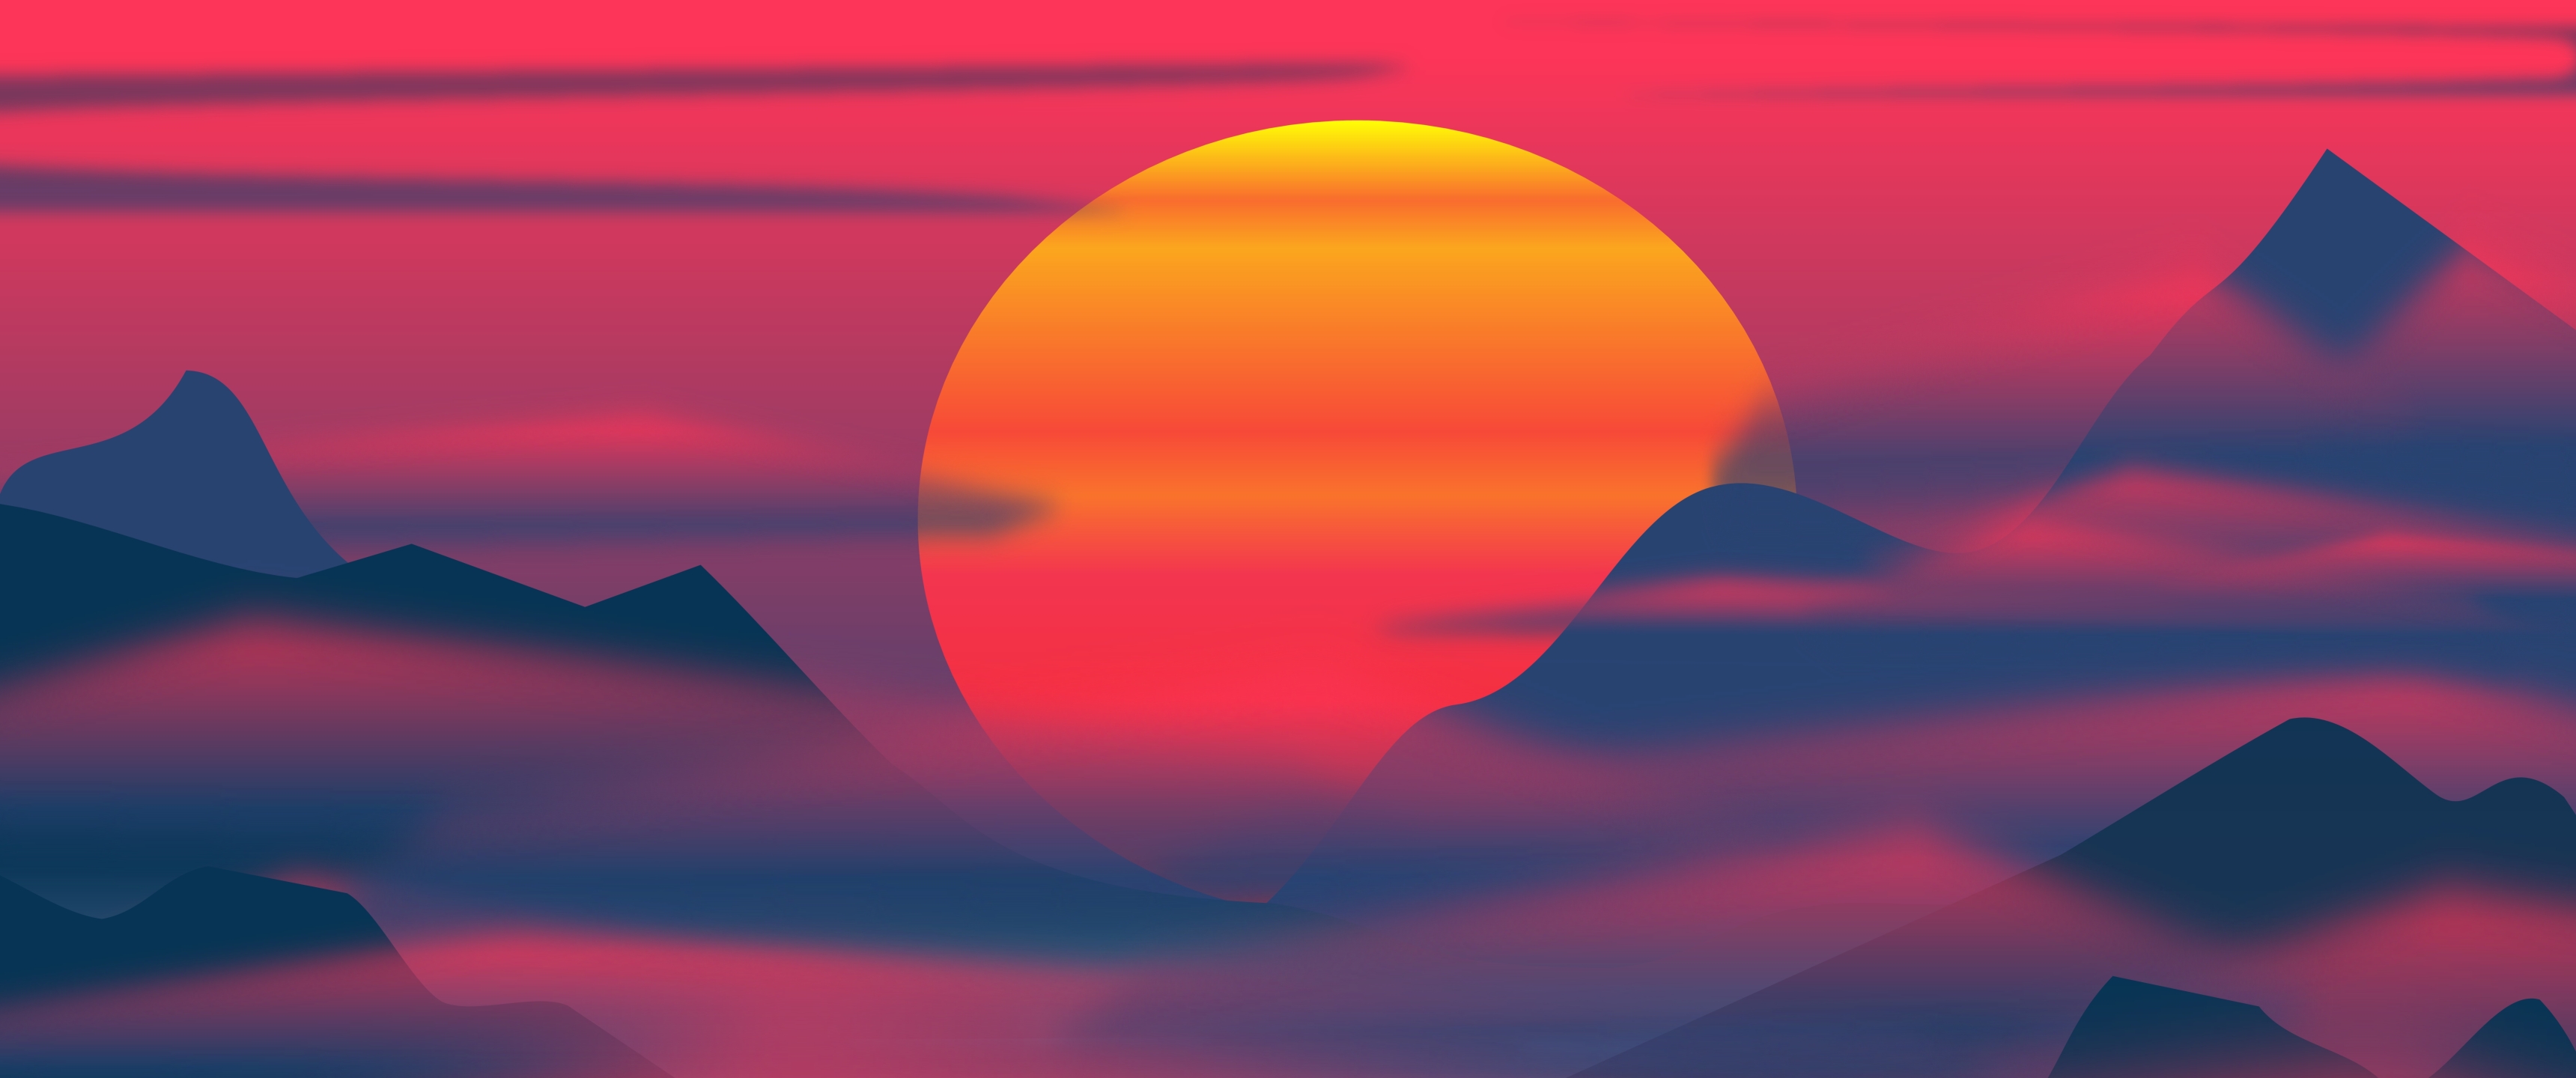 A sunset over mountains and hills - 3440x1440